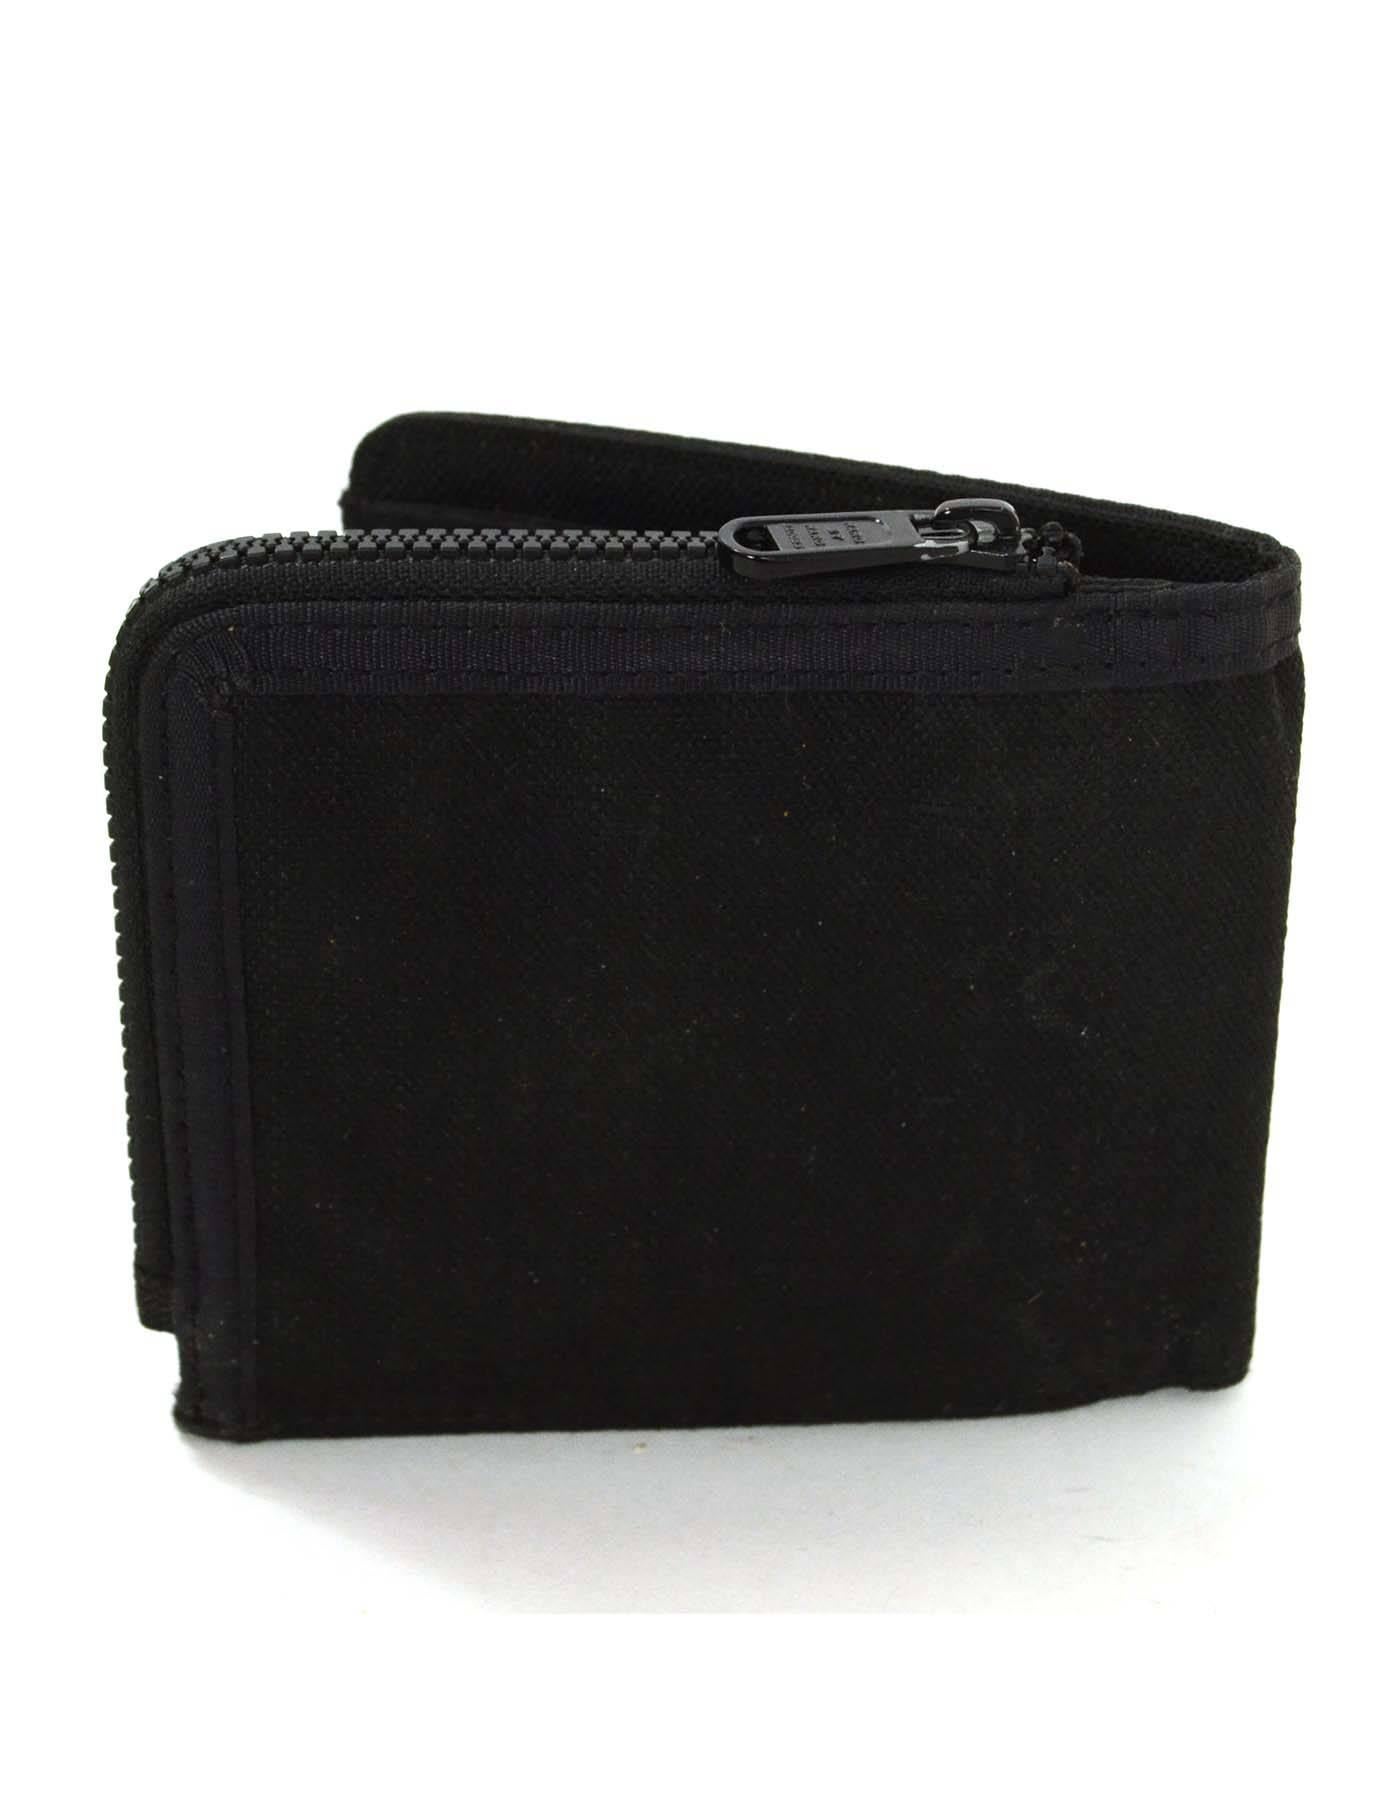 Marc By Marc Jacobs Black Canvas Mens Wallet 
Features tag with Marc by Marc Jacobs logo stitched on front corner of wallet
Made In: China
Color: Black
Harware: Black
Materials: Canvas
Closure/Opening: Bi-fold closure
Exterior Pockets: One